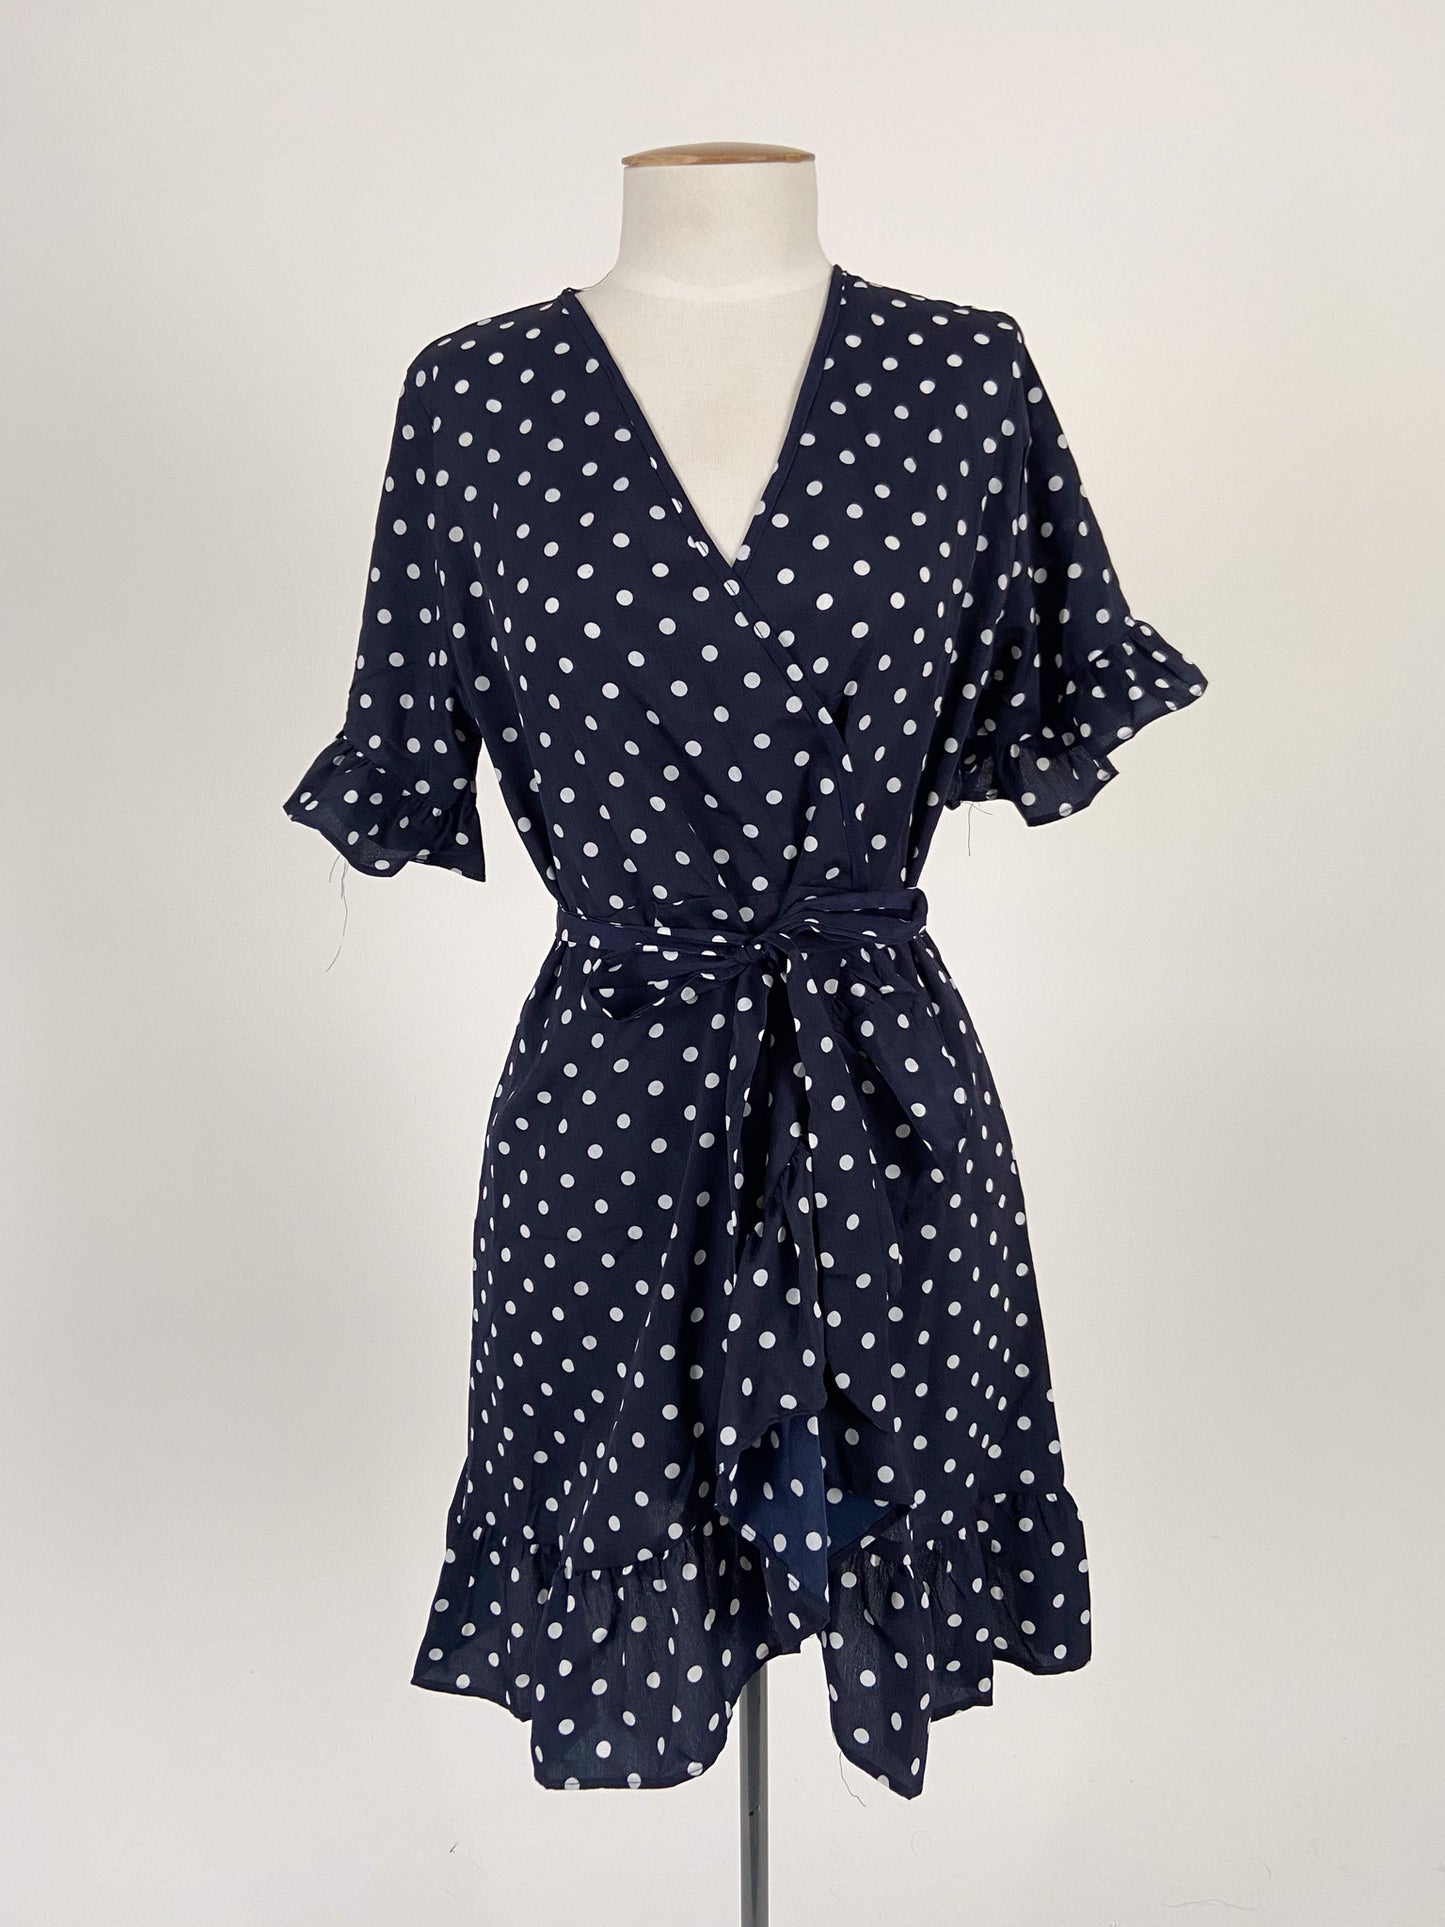 Unknown Brand | Navy Cocktail/Formal Dress | Size S